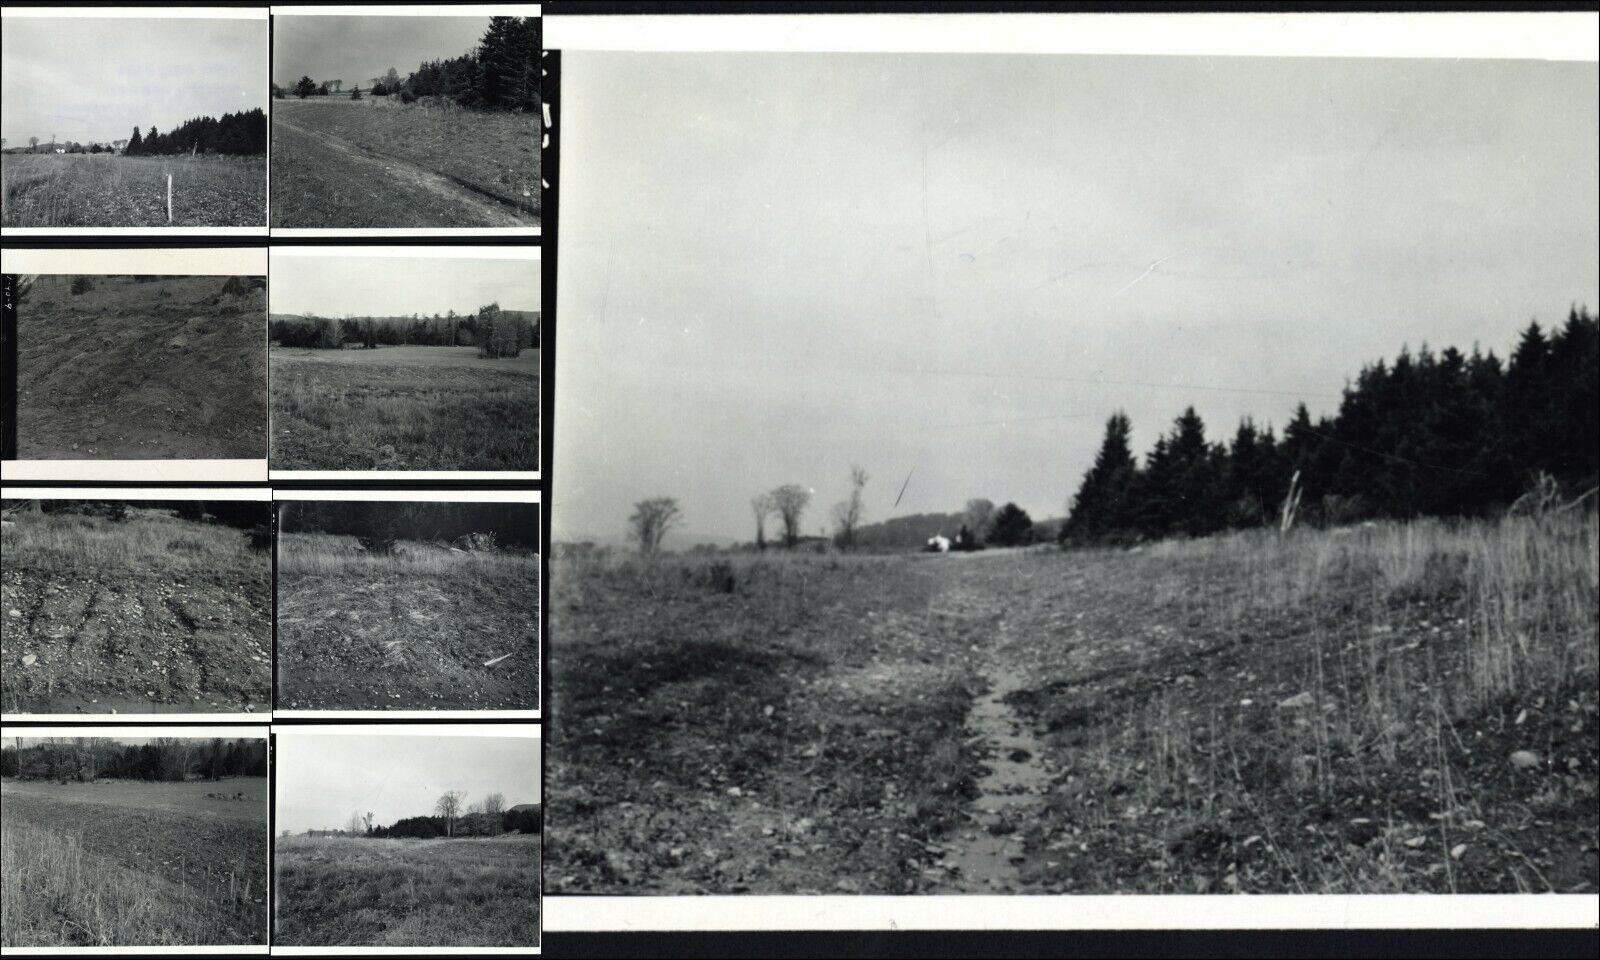 WENDELL FOLSOM FARM - Waitsfield, VERMONT - 1956 PHOTOGRAPHS [Drainage] Lot of 9